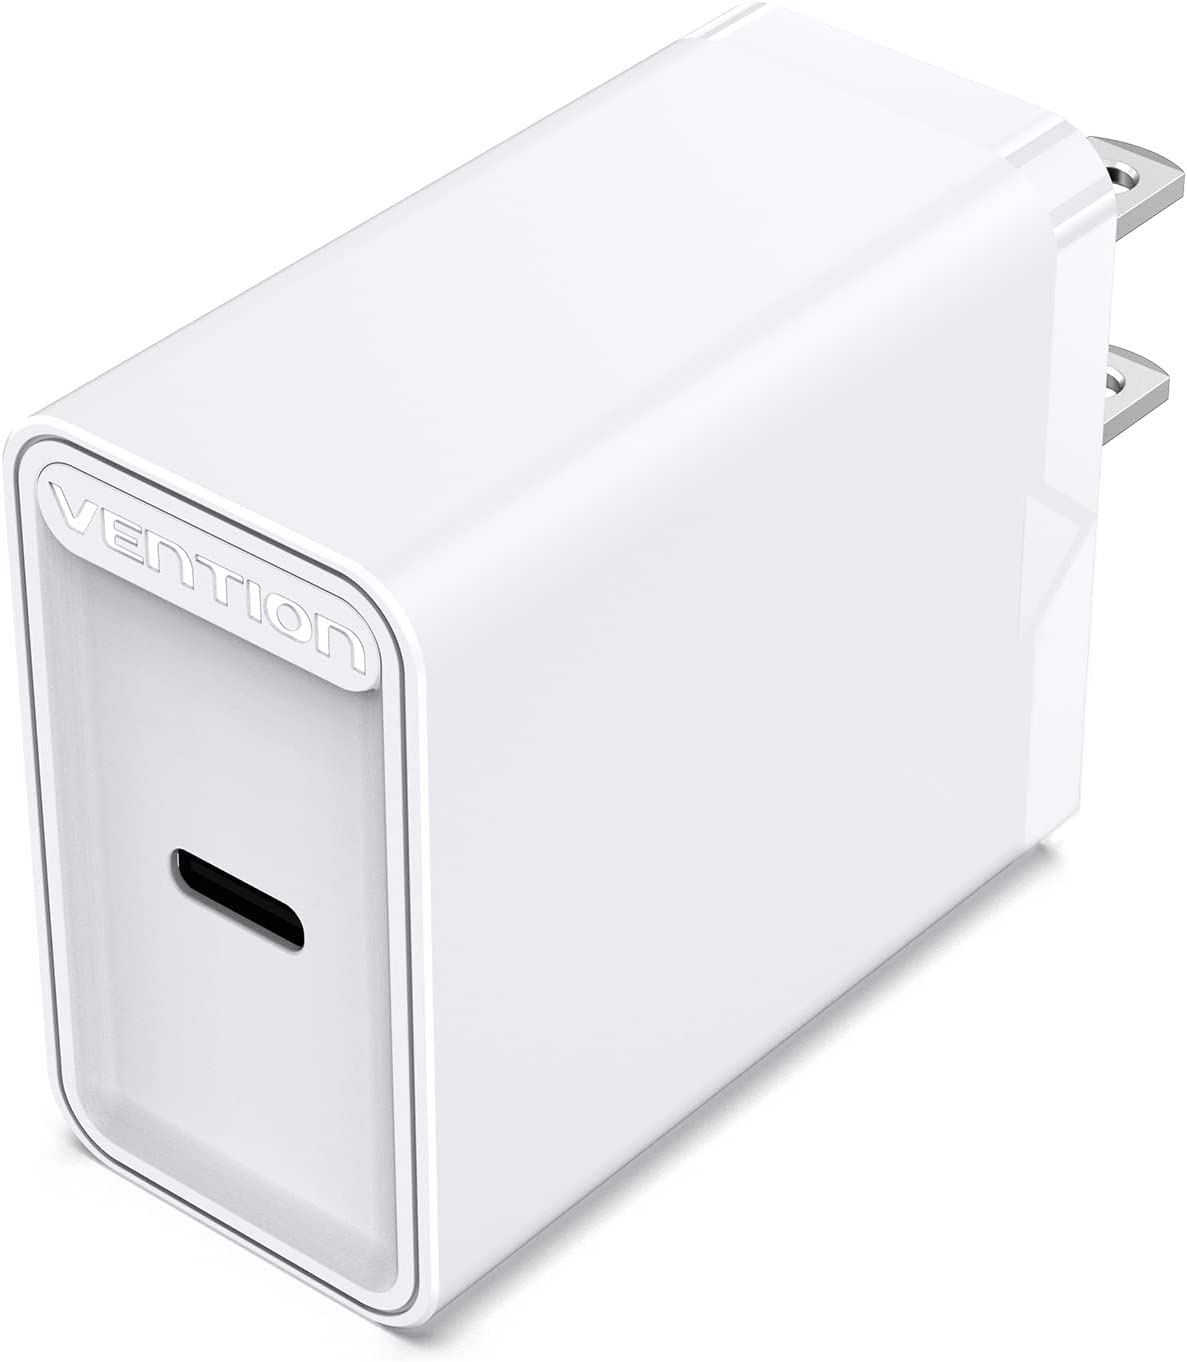 Vention USB-C Power Delivery Port Fast Charge AC Wall Charger for Phone Tablet and Other Devices (US Plug) (Black, White) (20W, 30W) | FAD, FAI